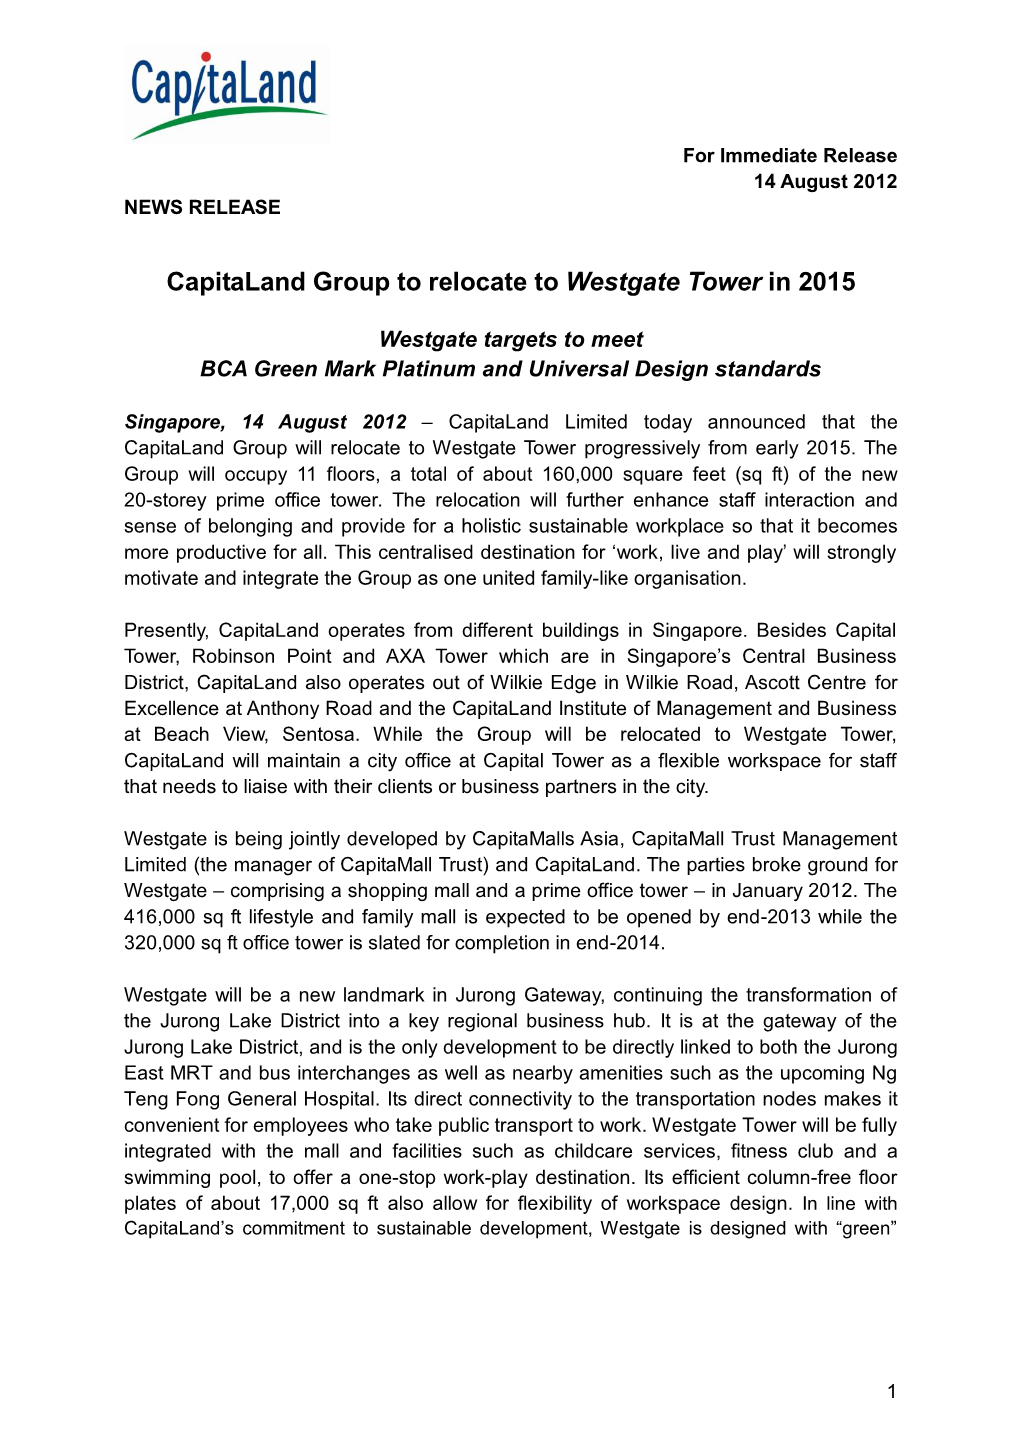 Capitaland Group to Relocate to Westgate Tower in 2015